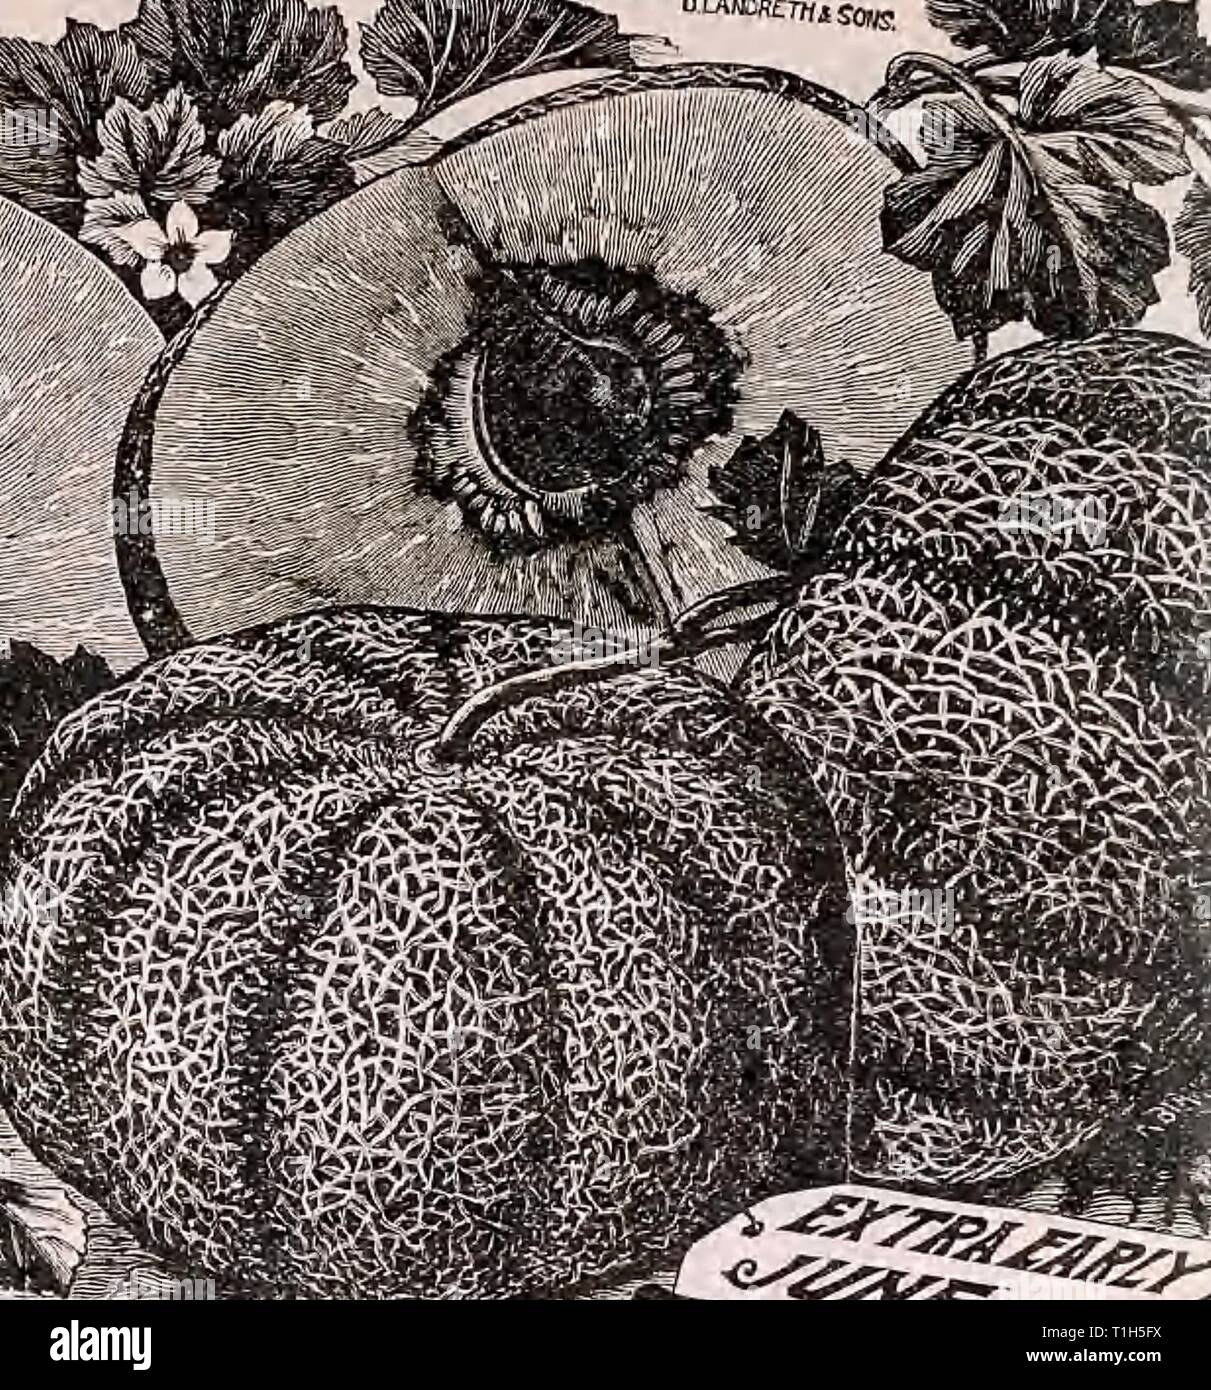 D Landreth Seed Company  D. Landreth Seed Company : [catalog]  DLandrethSeedCo00LandB Year: 19uu  CANTALOUPE OR CITRON. 33 CANTALOUPE OR CiTRONâcontinued. 4iine Arundel.âA tliiek oval Melon of firet size, ribs very distinct iinil tieitcd nil over. Flesh green and sugary. It is in all res'pects one of ilie best or Melons, its entire webbing or netting fits it to resist abrasion diiruitr 'li'pnienl. Pkts. 10c.; oz. 15p. Xetted Kutmes: Cantaloupe.âPkls 5c. ami 10c.; peroz. lOc Larjje Acme.âc. nndlOc.; peroz. 10c. Missouri.âA new sort of rare (food qualUy. Form globular, flattened at f!acUeud; Avc Stock Photo